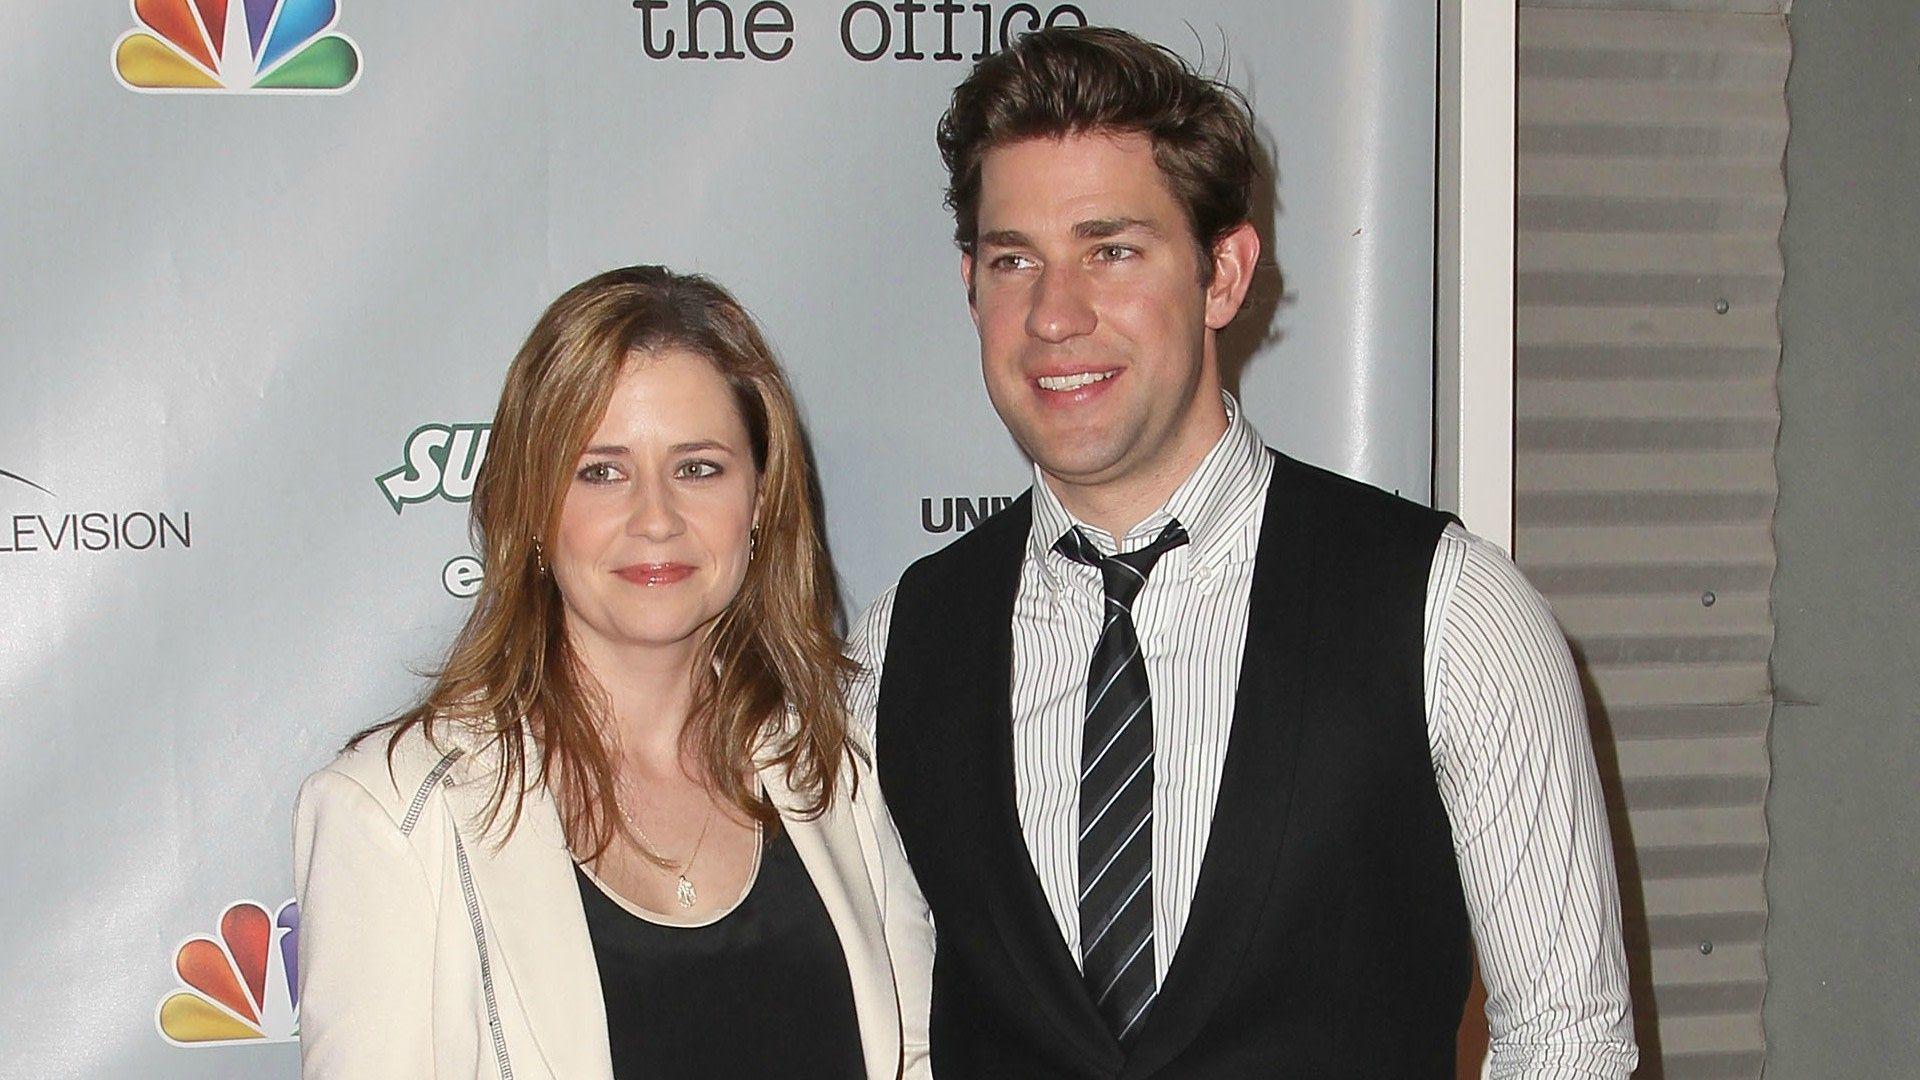 Jenna Fischer Has a Lot to Say About John Krasinski in Her New Book